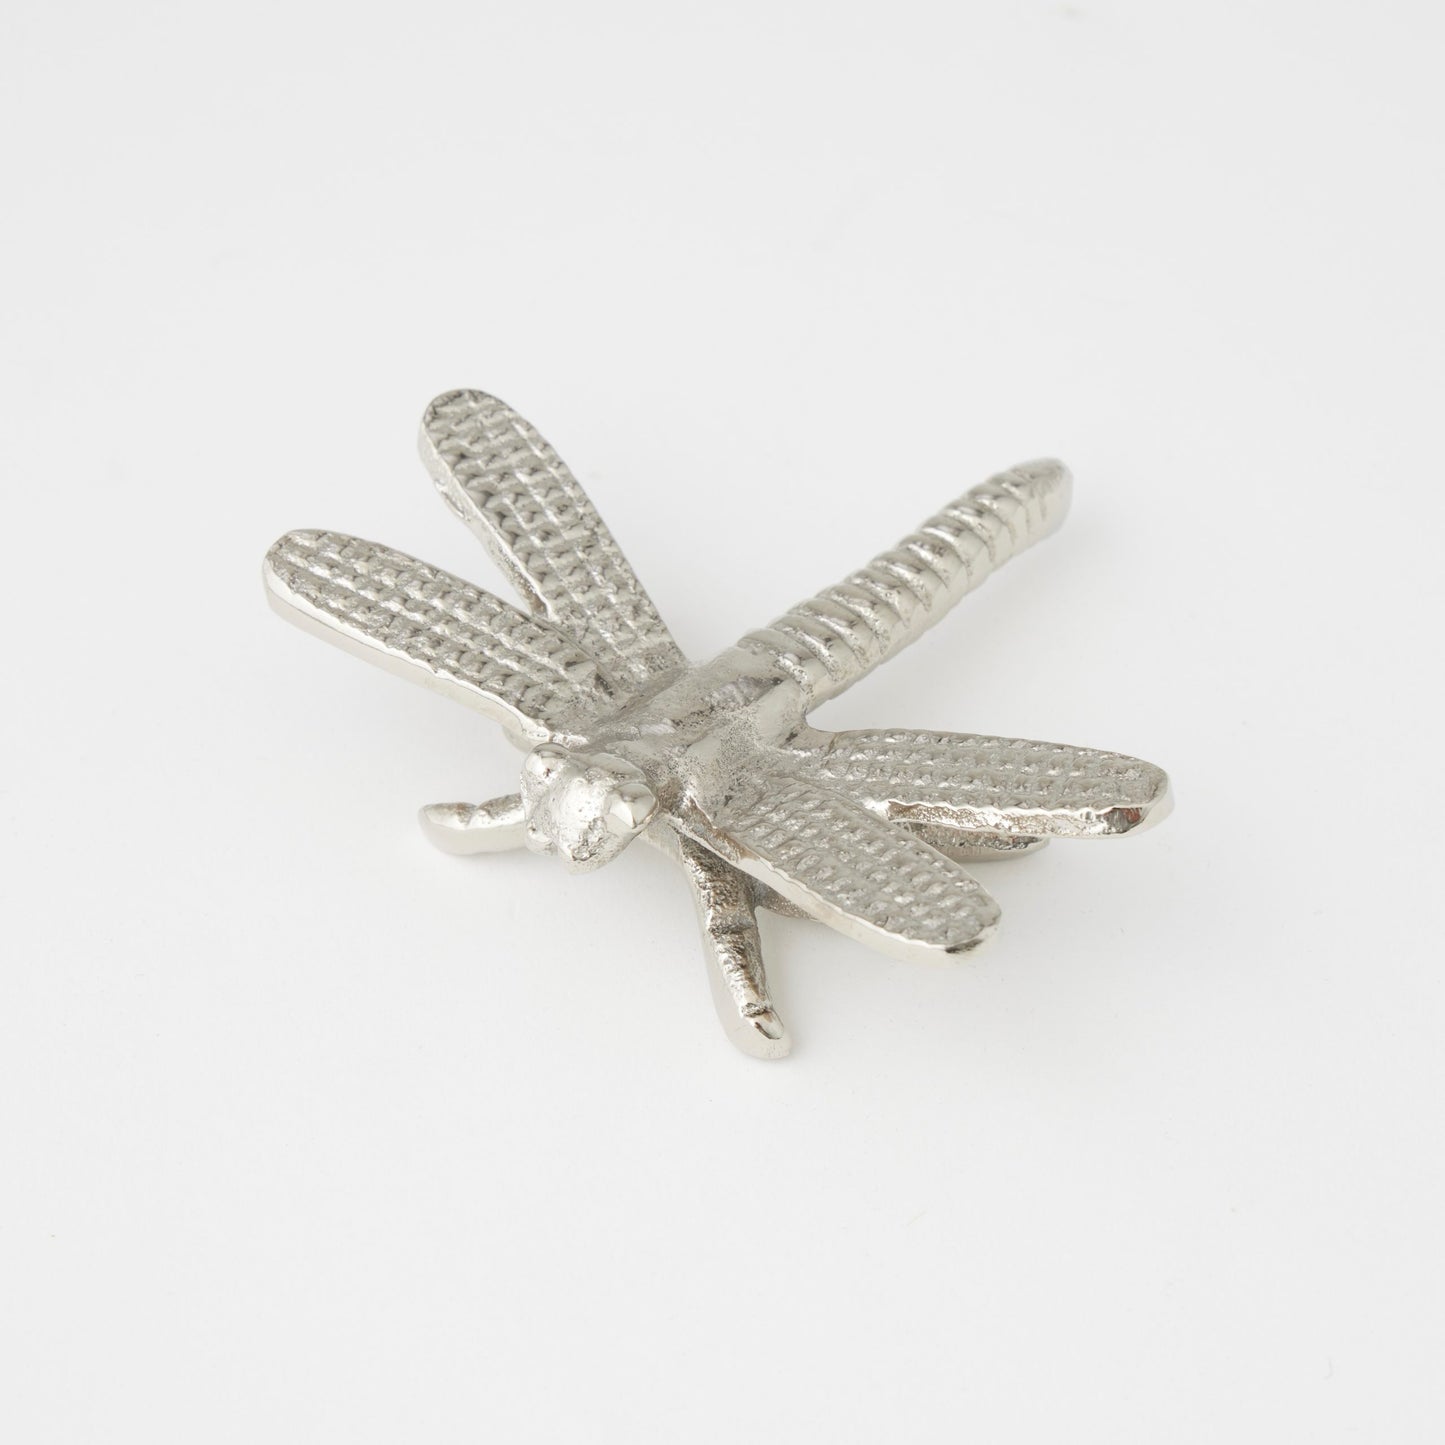 DRAGONFLY SCULPTURE SMALL - SILVER